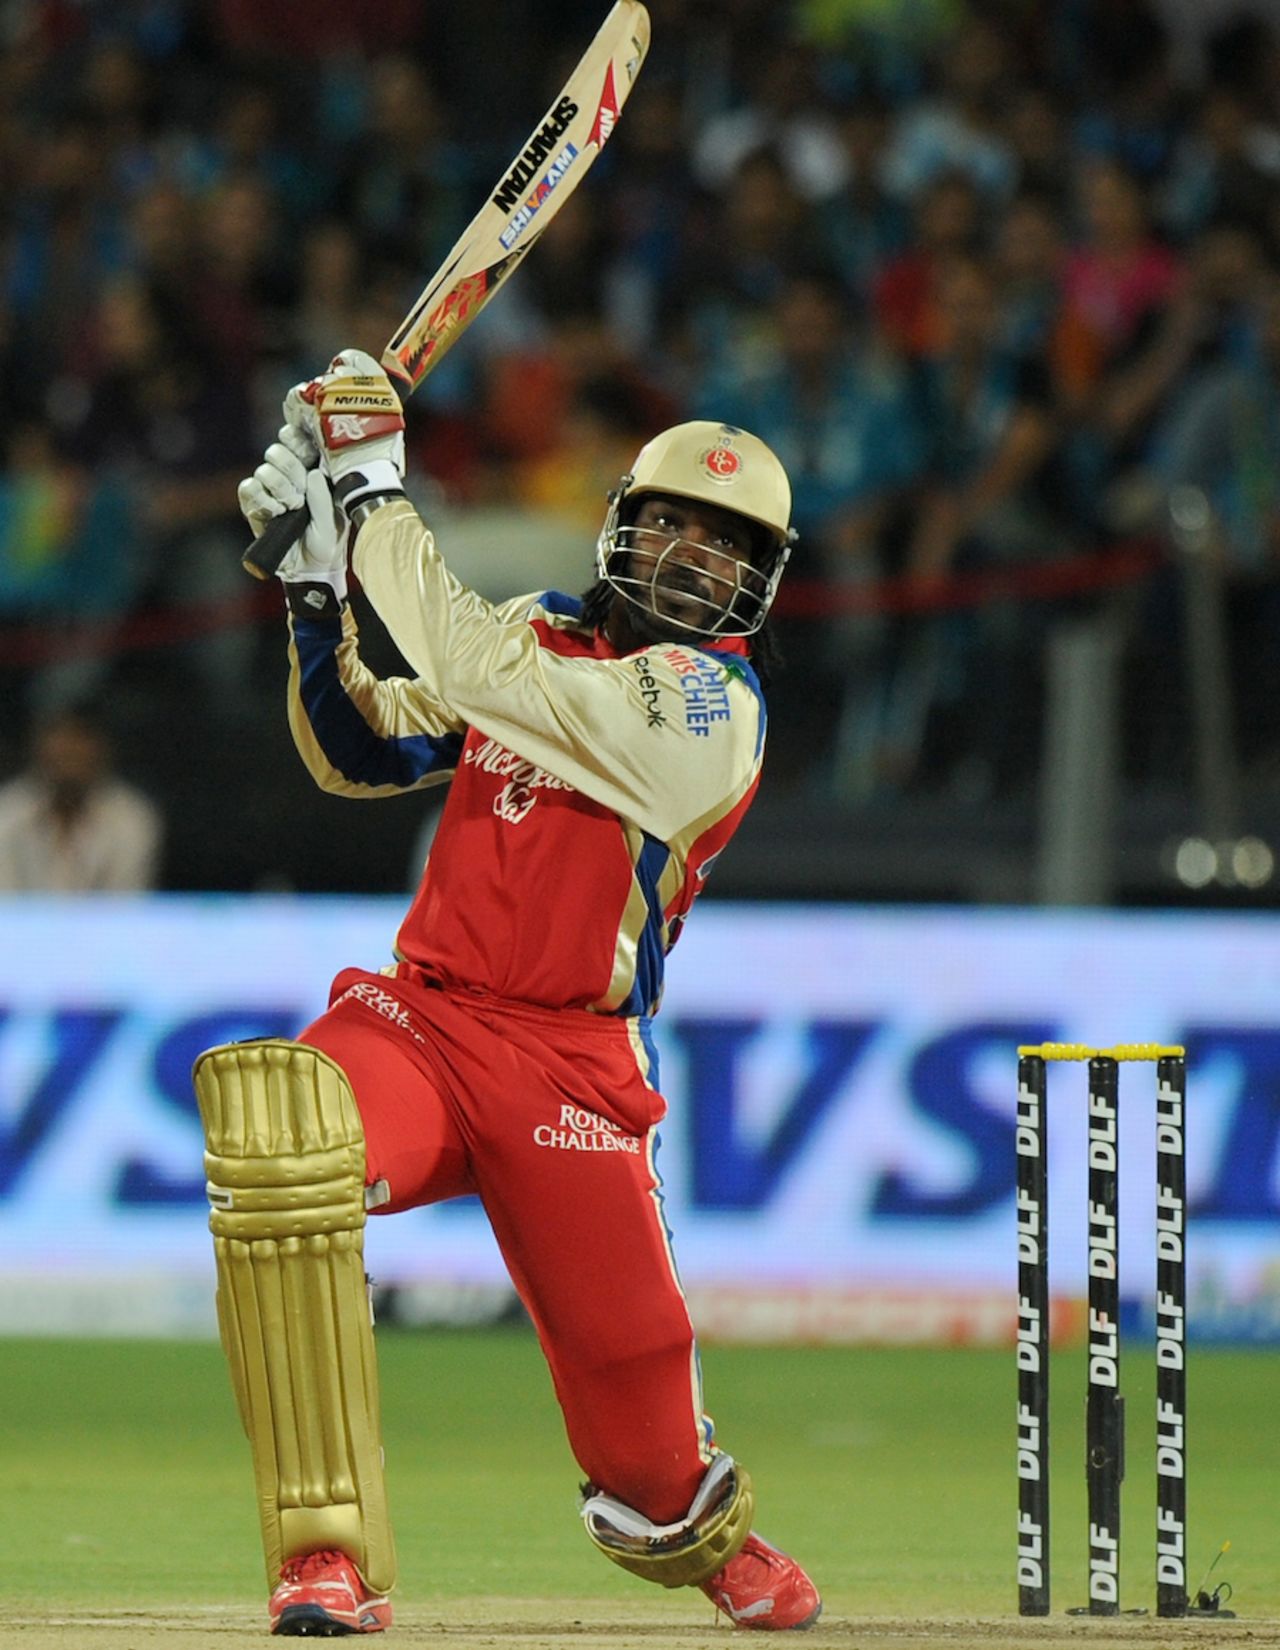 Chris Gayle smashed six sixes in his half-century, Pune Warriors v Royal Challengers Bangalore, IPL, Pune, May 11, 2012